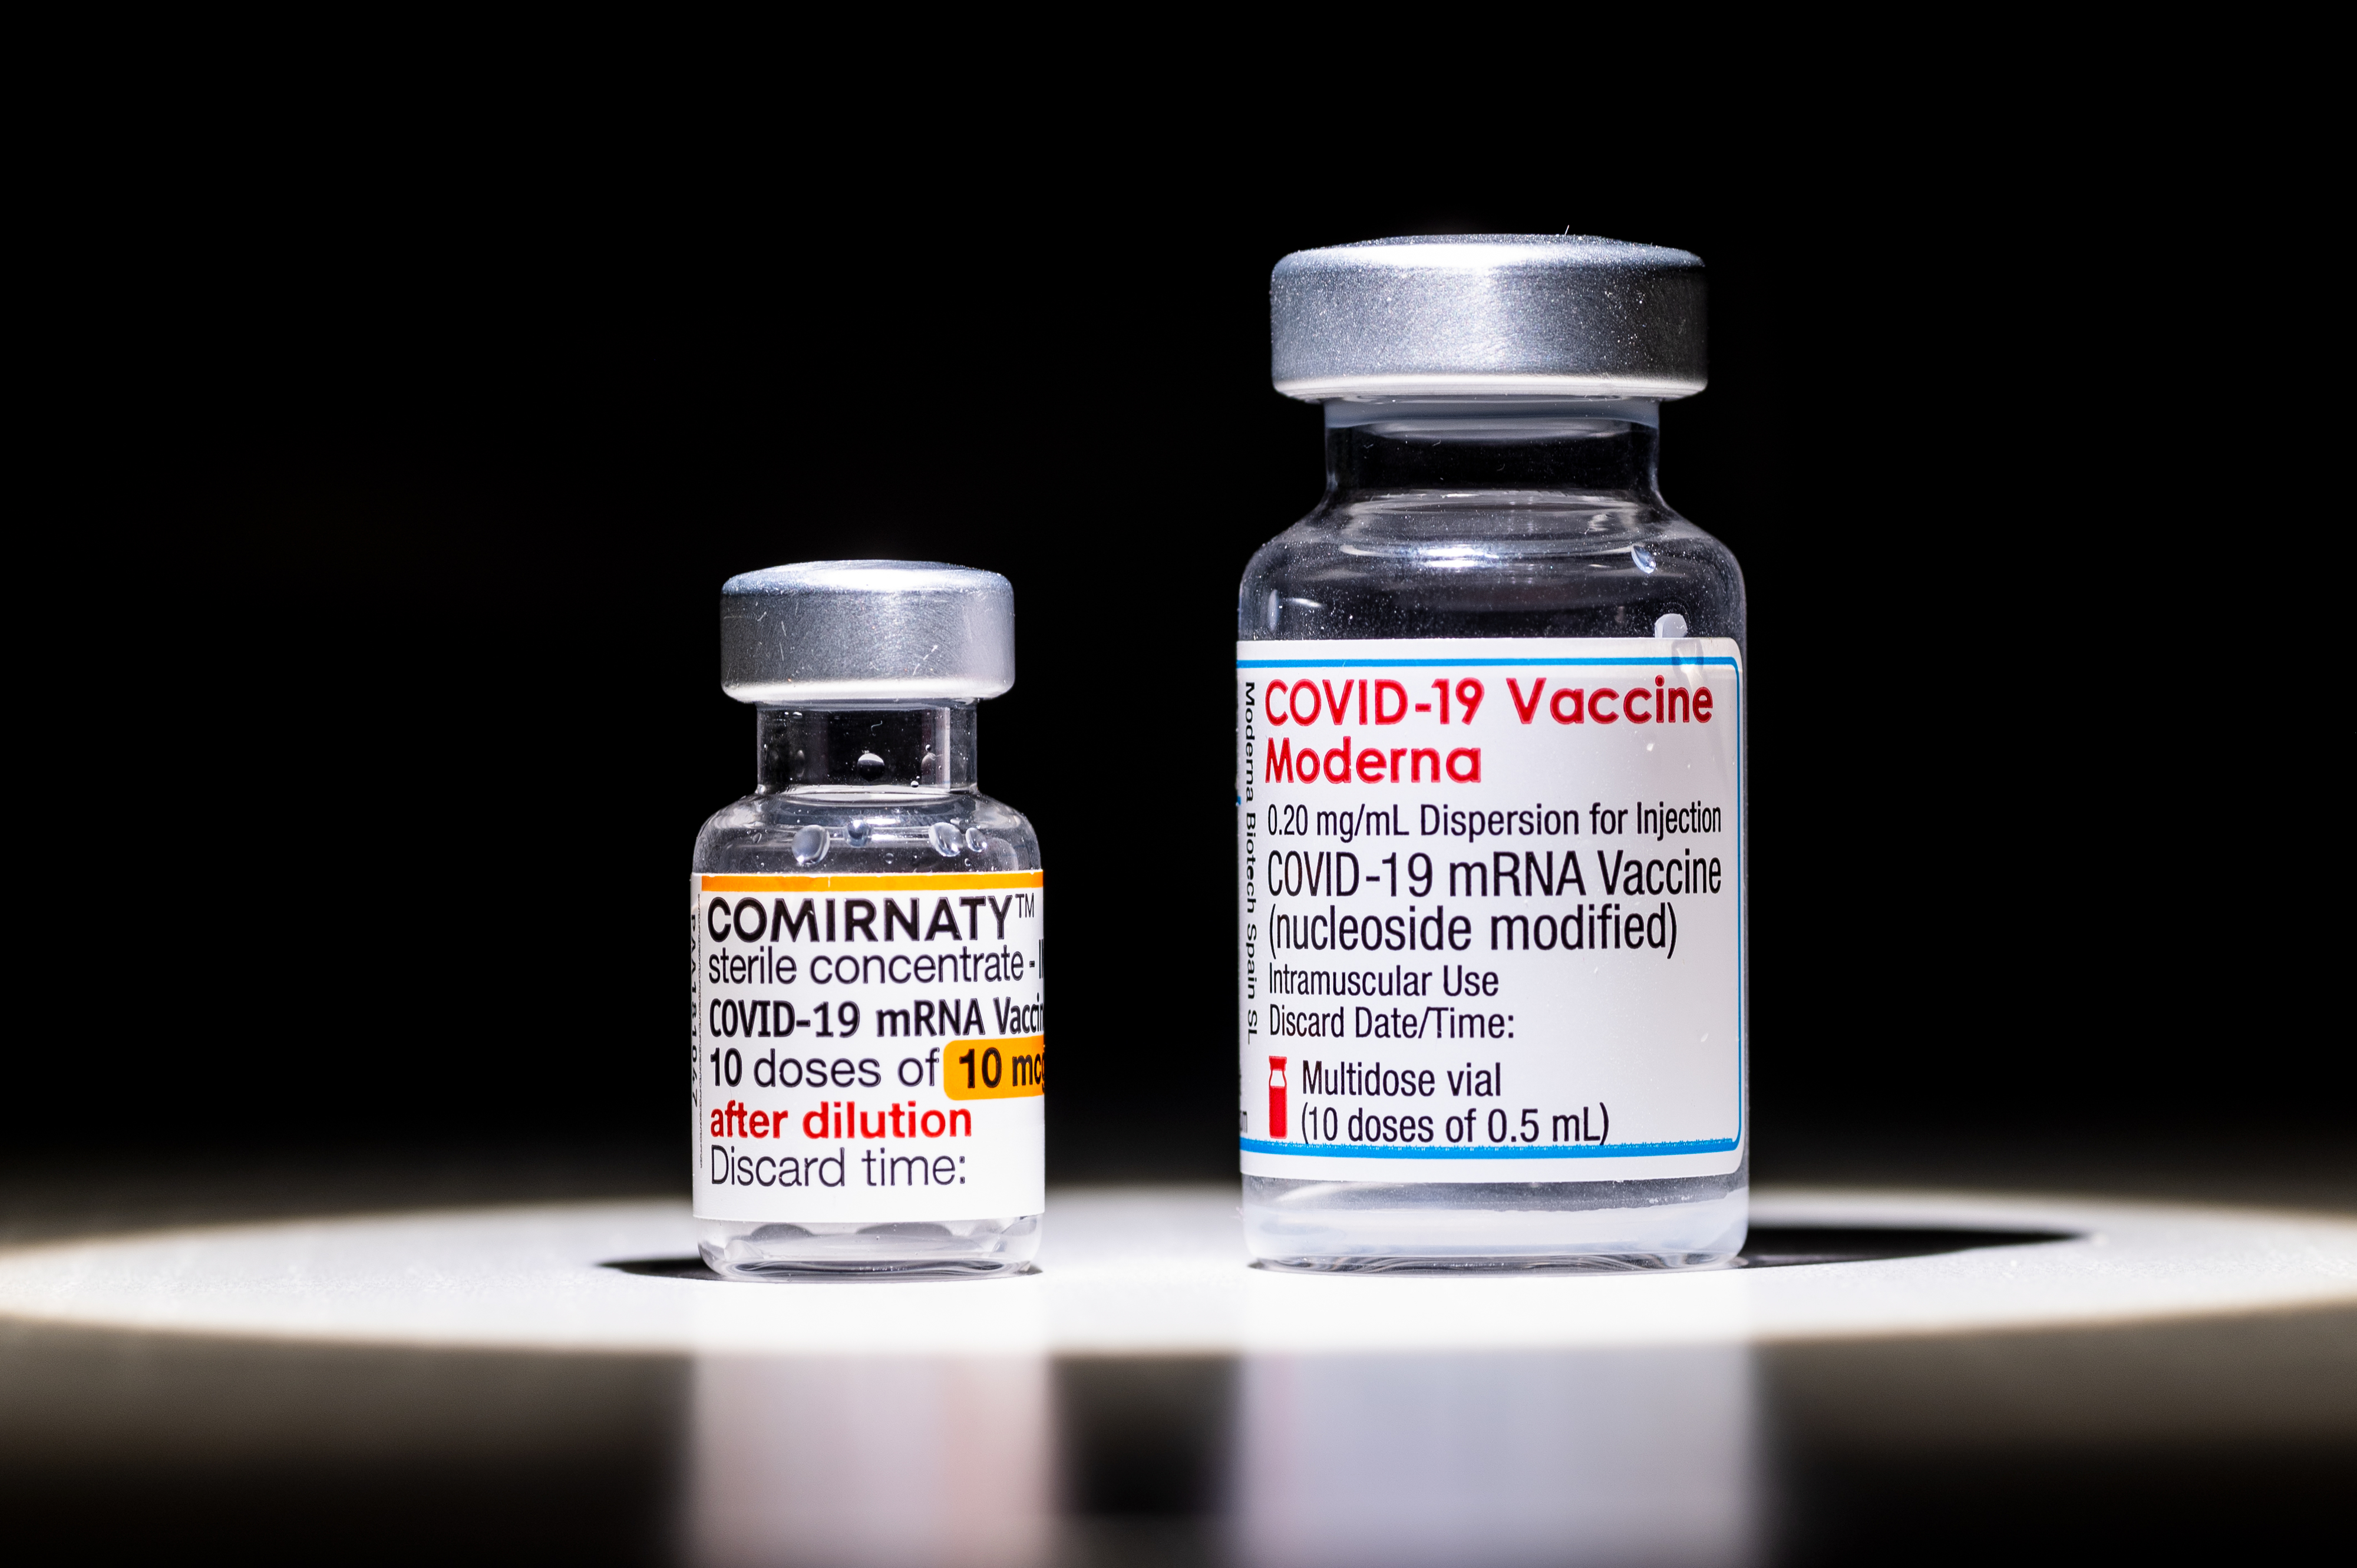 Two COVID-19 vaccine vials labeled Pfizer-BioNTech and Moderna on a surface